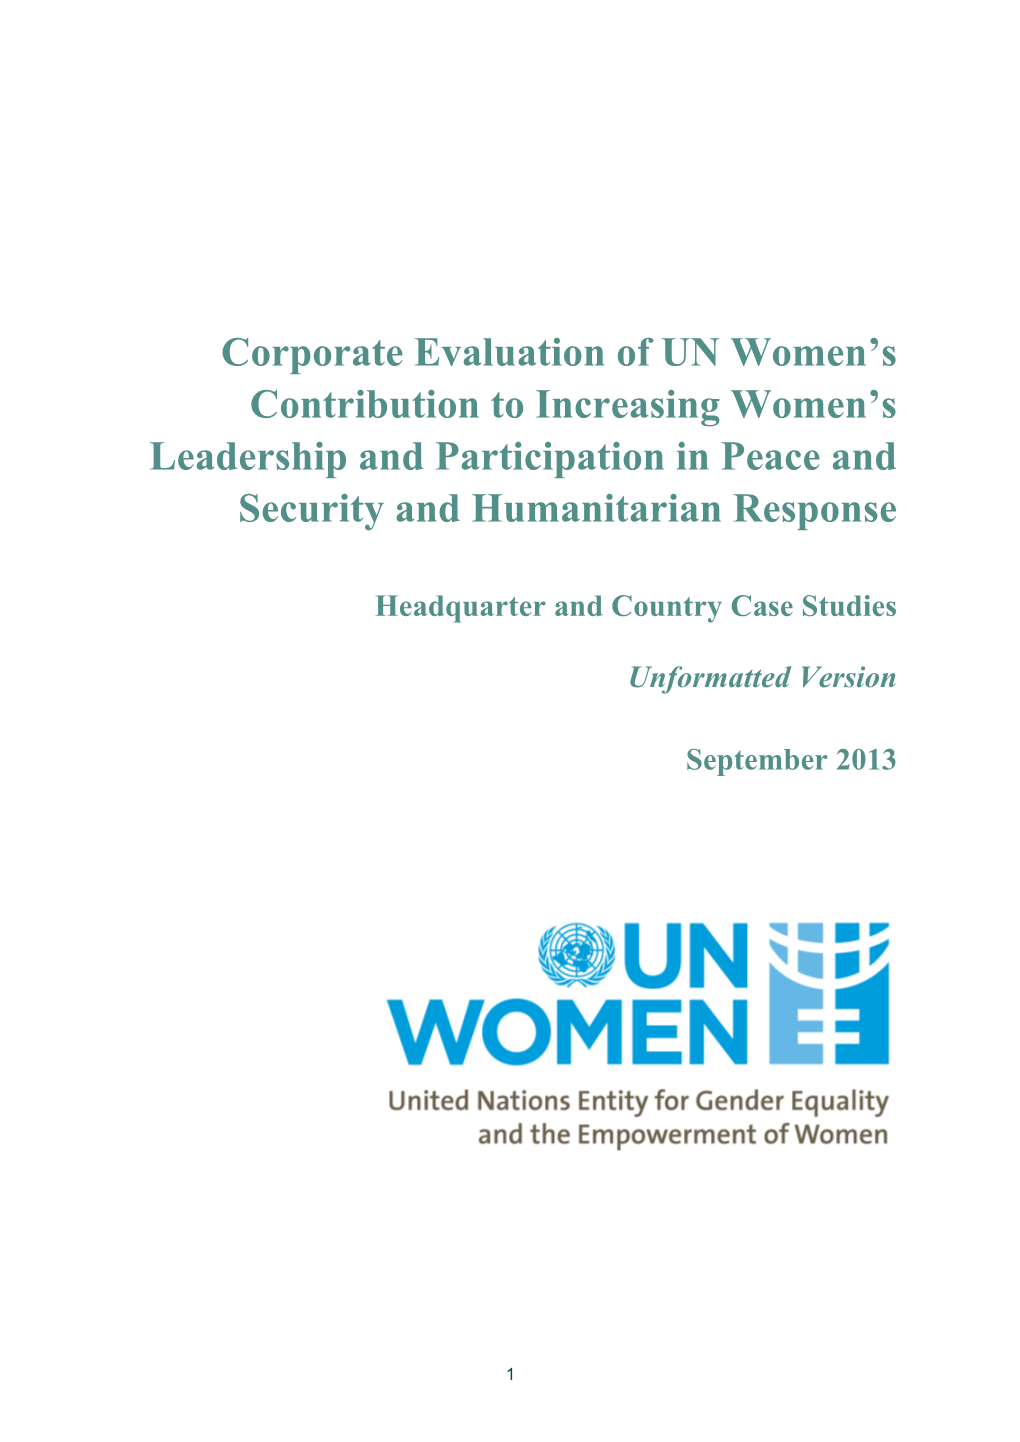 Corporate Evaluation of UN Women's Contribution to Increasing Women's